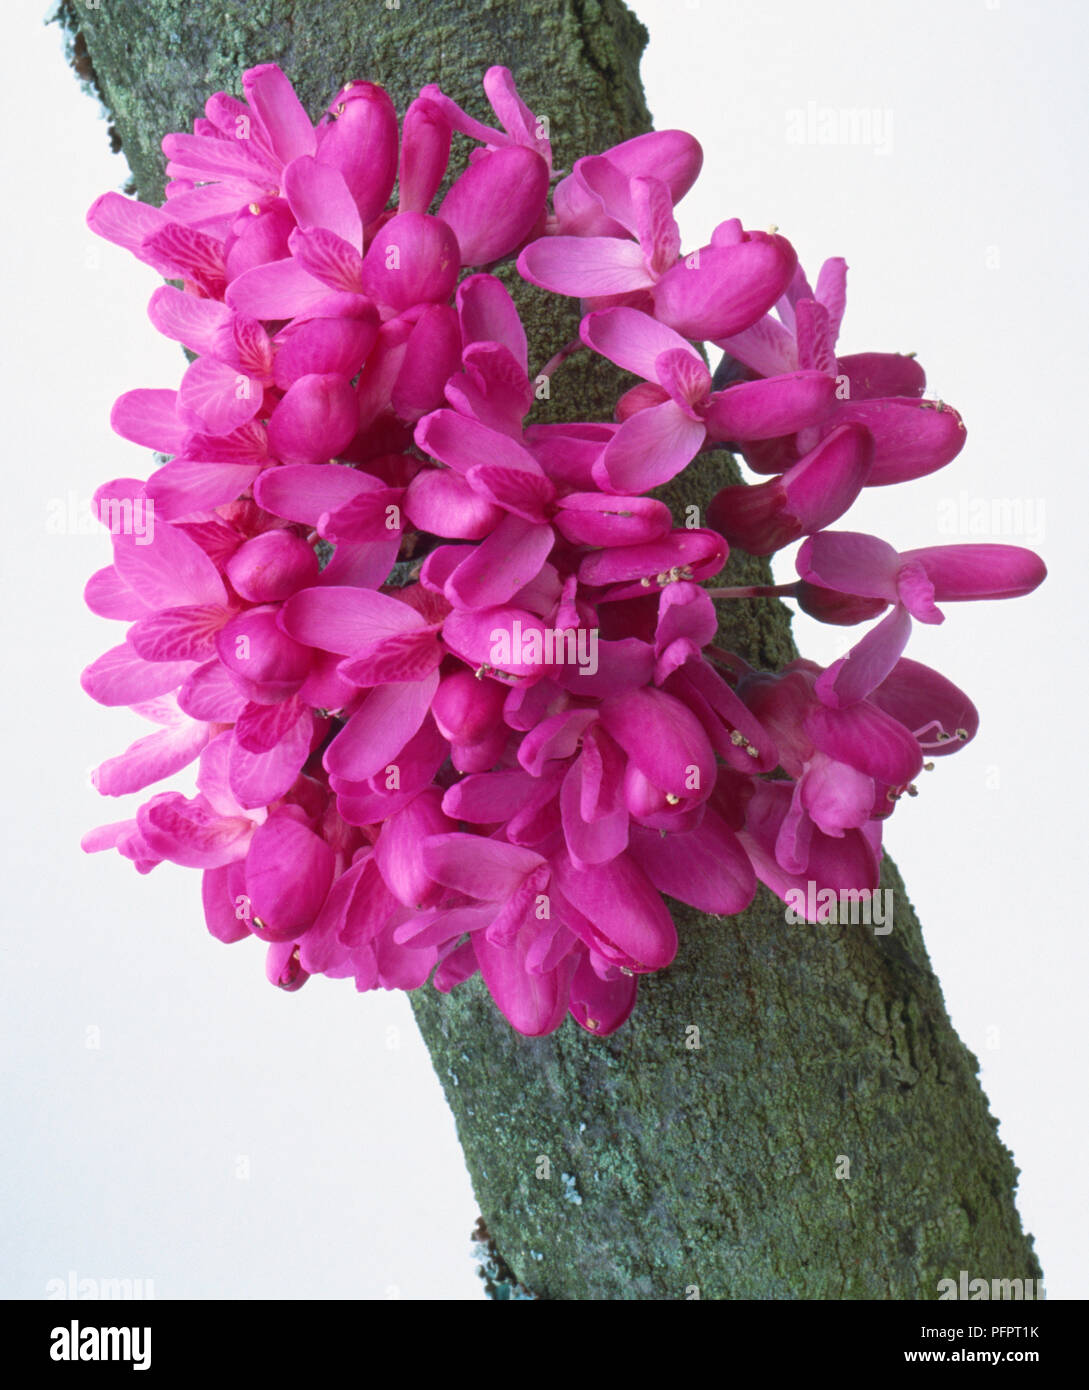 Leguminosae, Cercis siliquastrum 'Bodnant', Judas Tree, squared-up image of grey-brown branch with cluster of pea-like, pink flowers. Stock Photo